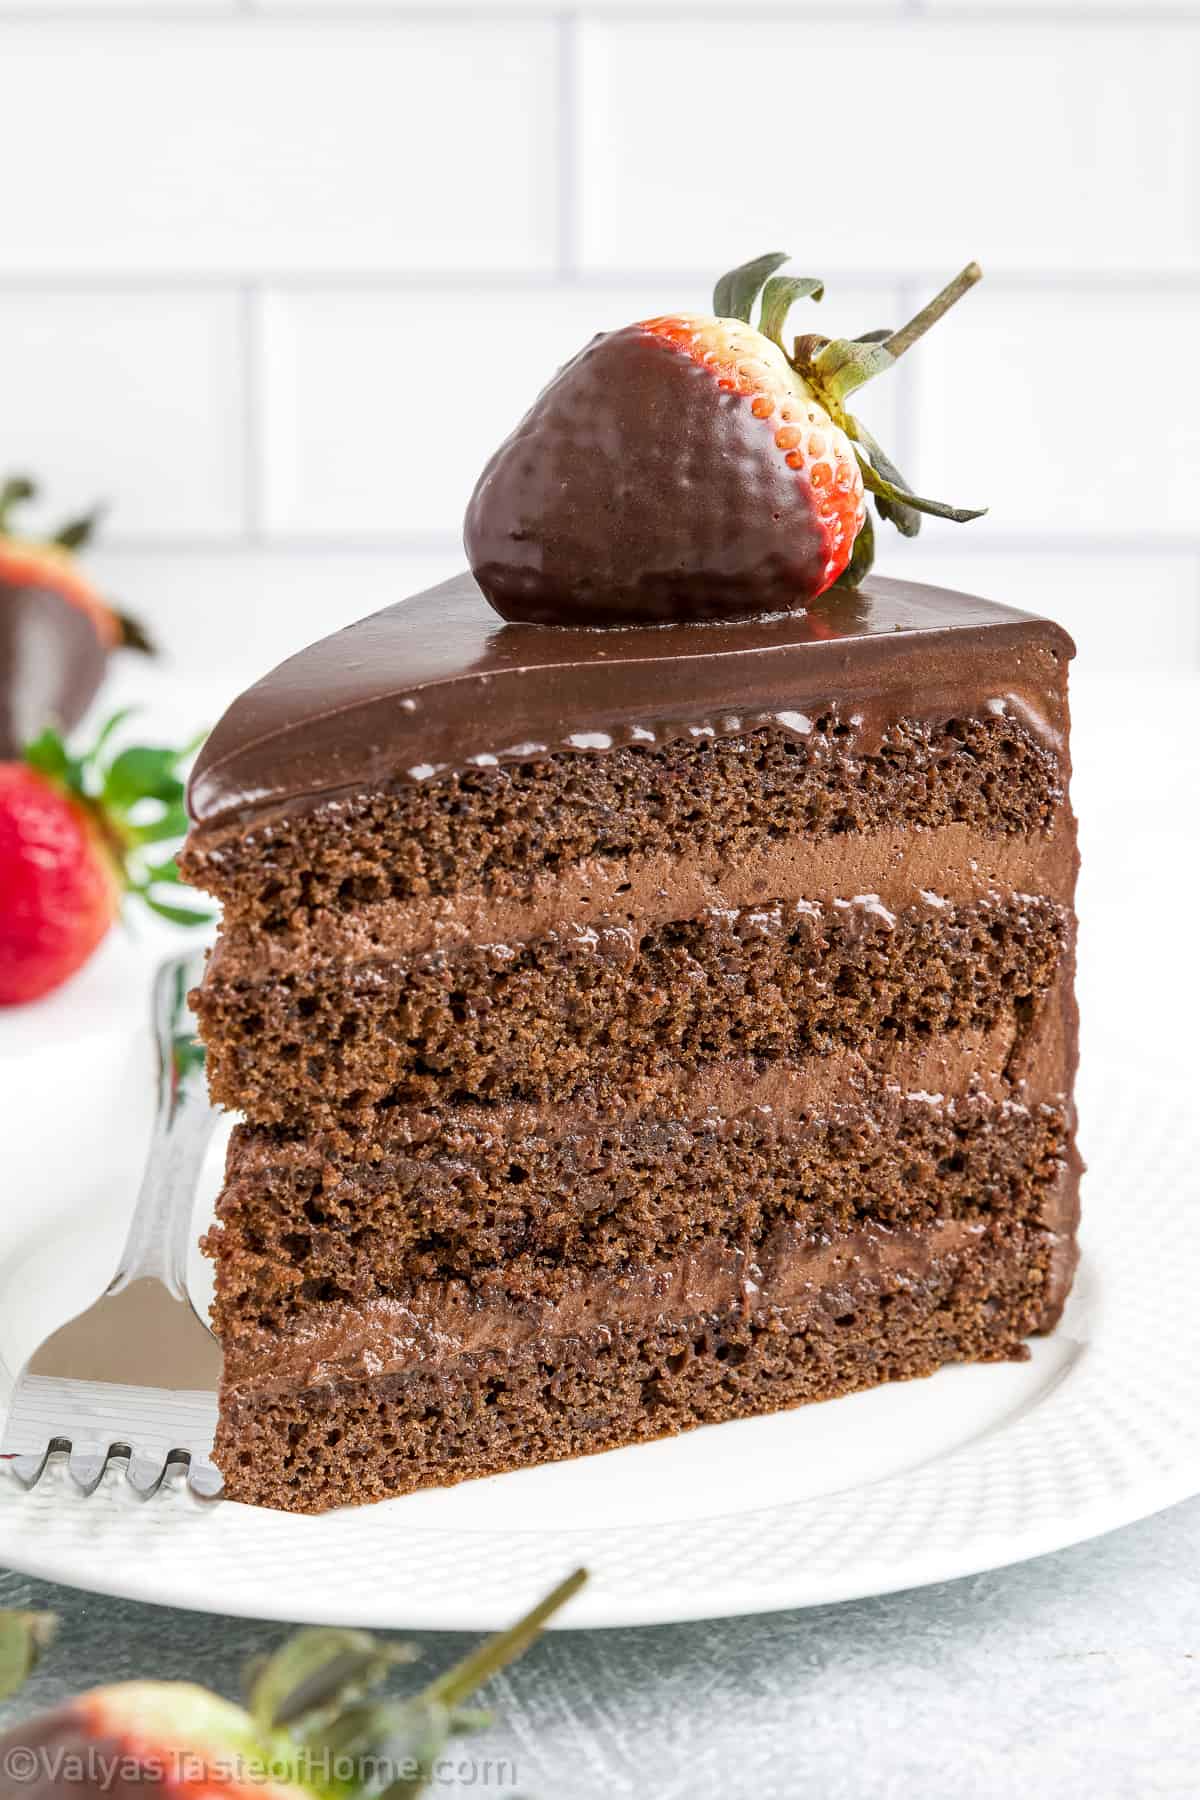 This chocolate layer cake features perfect layers of classic chocolate cake and a rich chocolate frosting.